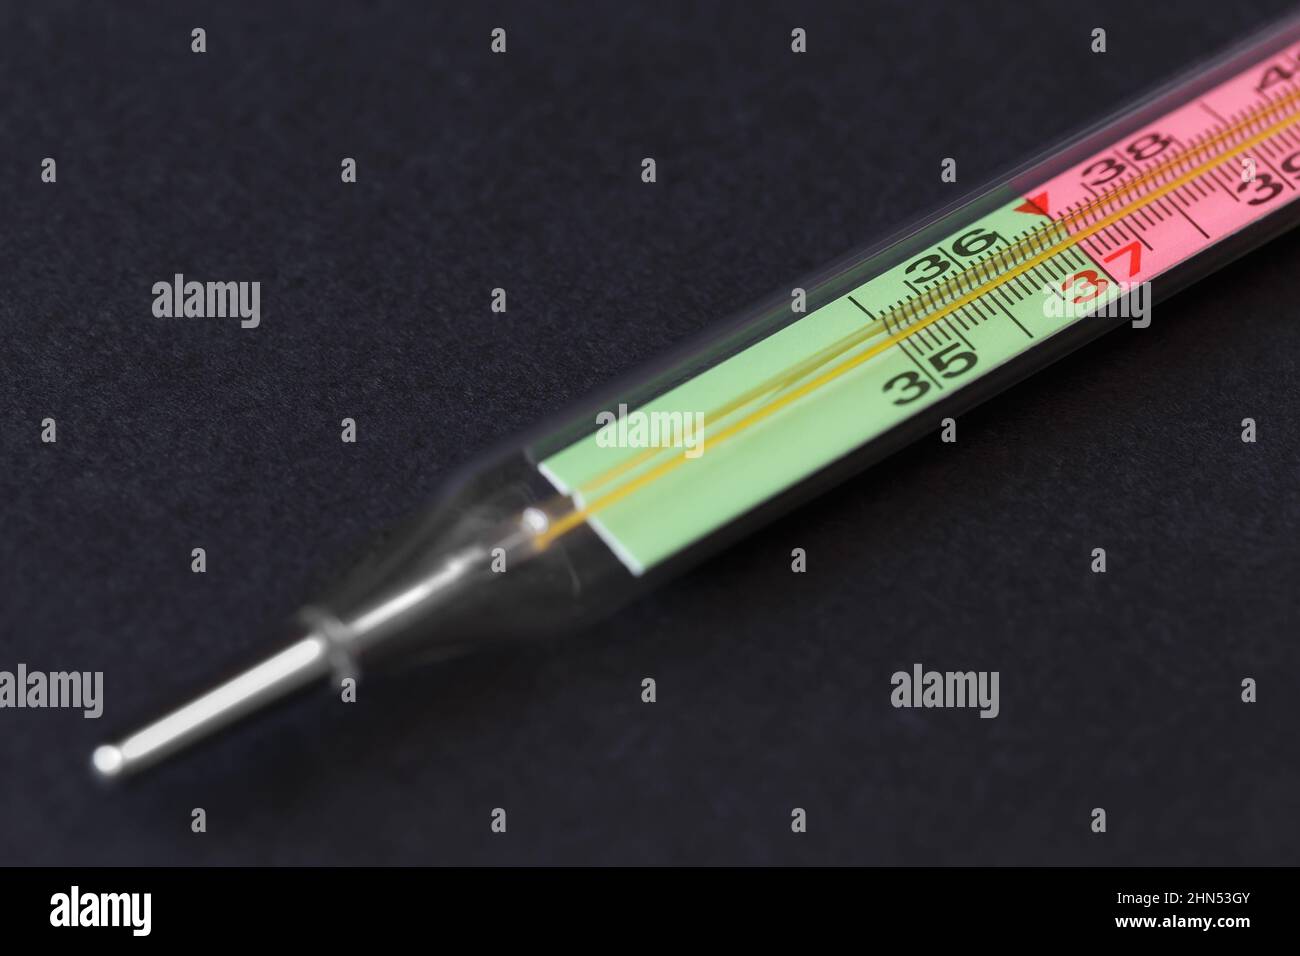 Mercury thermometer with a two-color scale on a dark background. Close-up with shallow depth of field Stock Photo